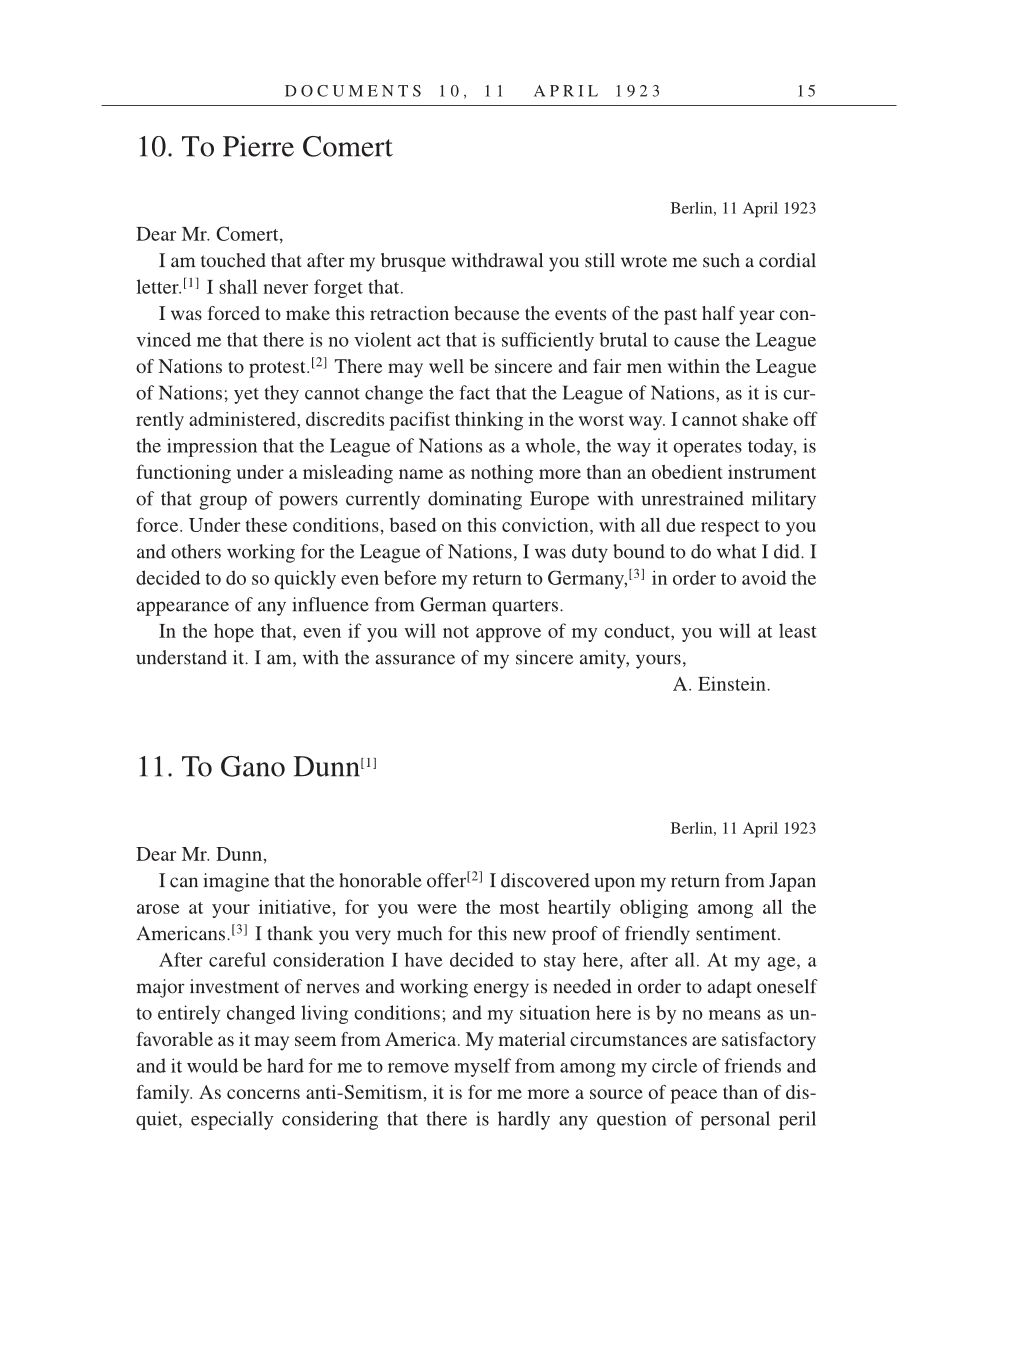 Volume 14: The Berlin Years: Writings & Correspondence, April 1923-May 1925 (English Translation Supplement) page 15